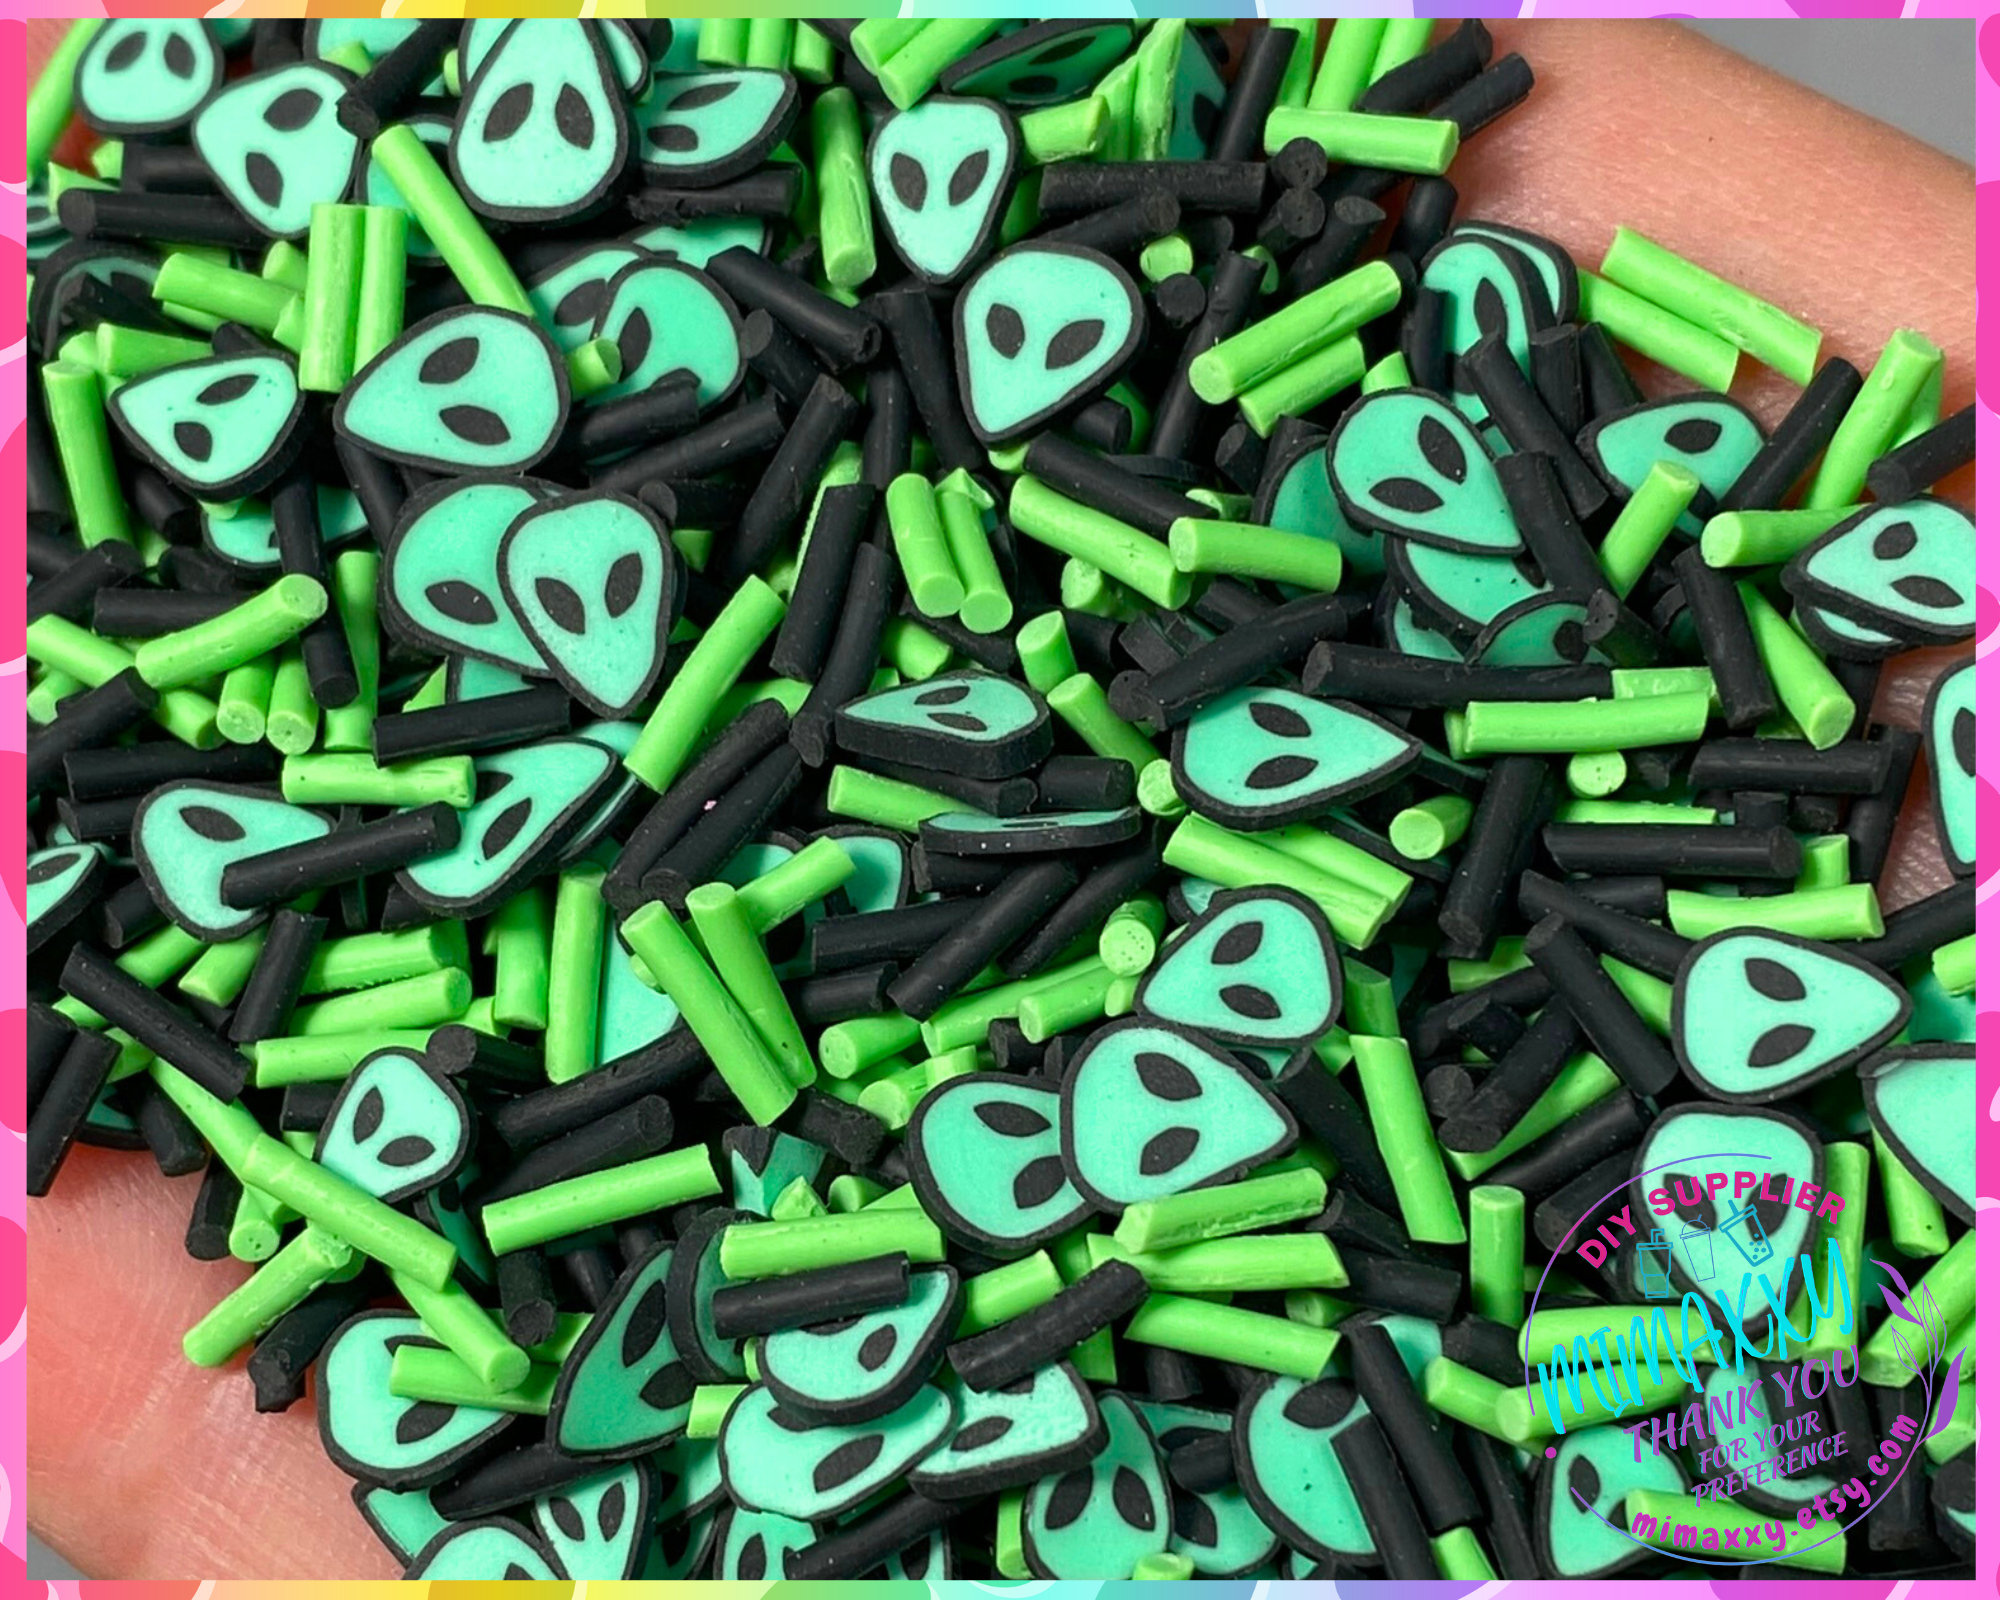 Pastel Goth Alien Acrylic Charms Spooky Creative Charms UFO Charm Take Me  Away Charm Goth Pendant Earring Necklace Ref: P18 